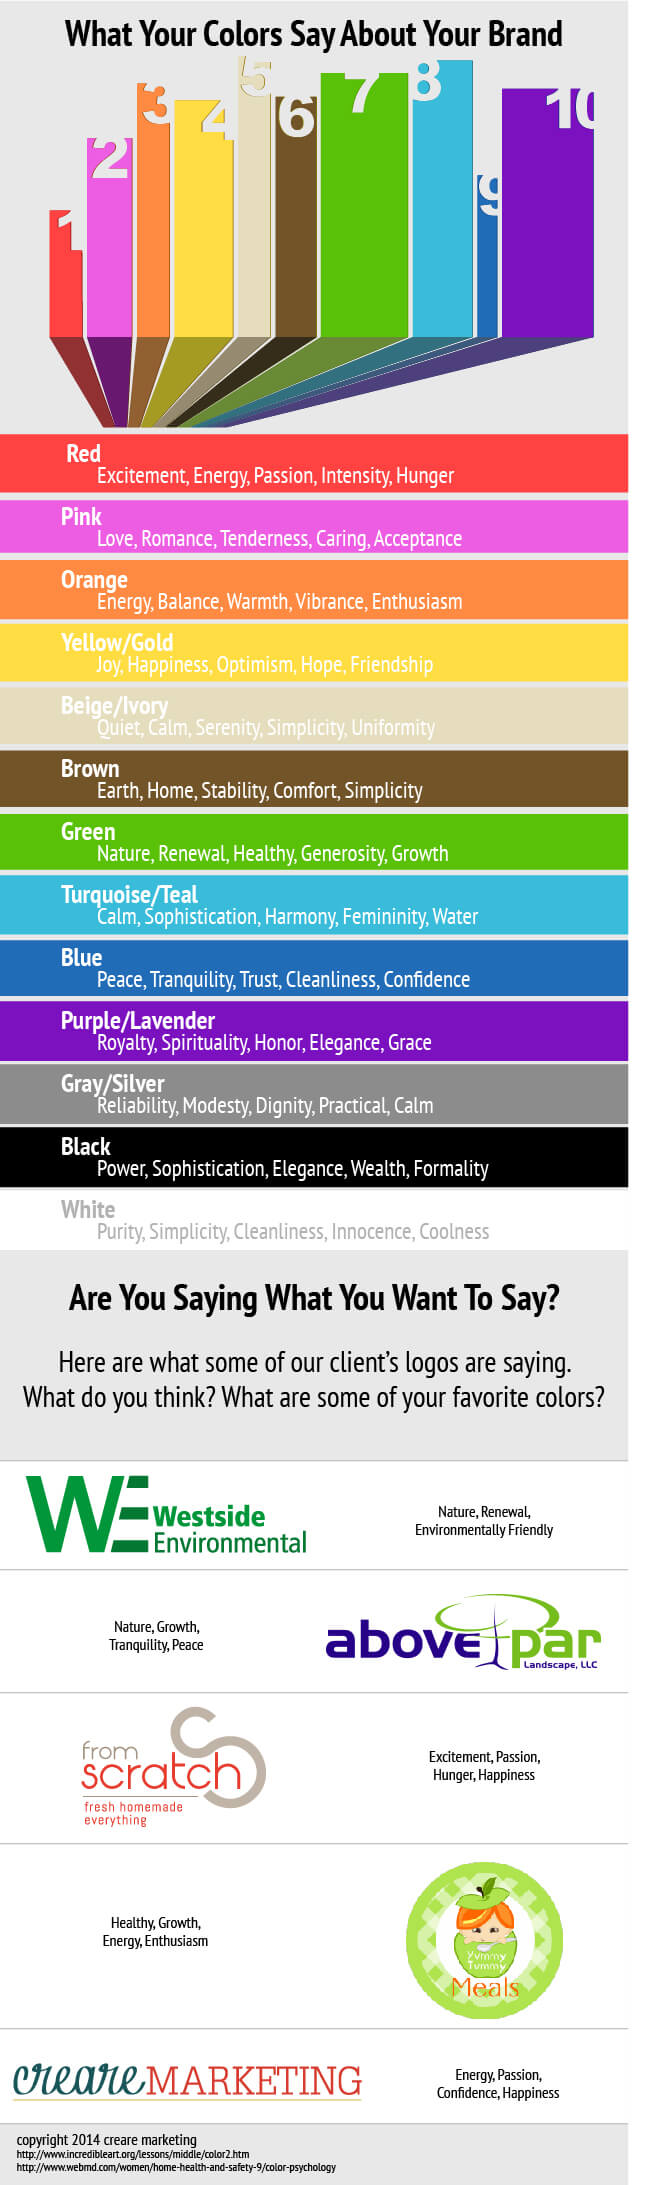 Branding Colors - What they Mean.